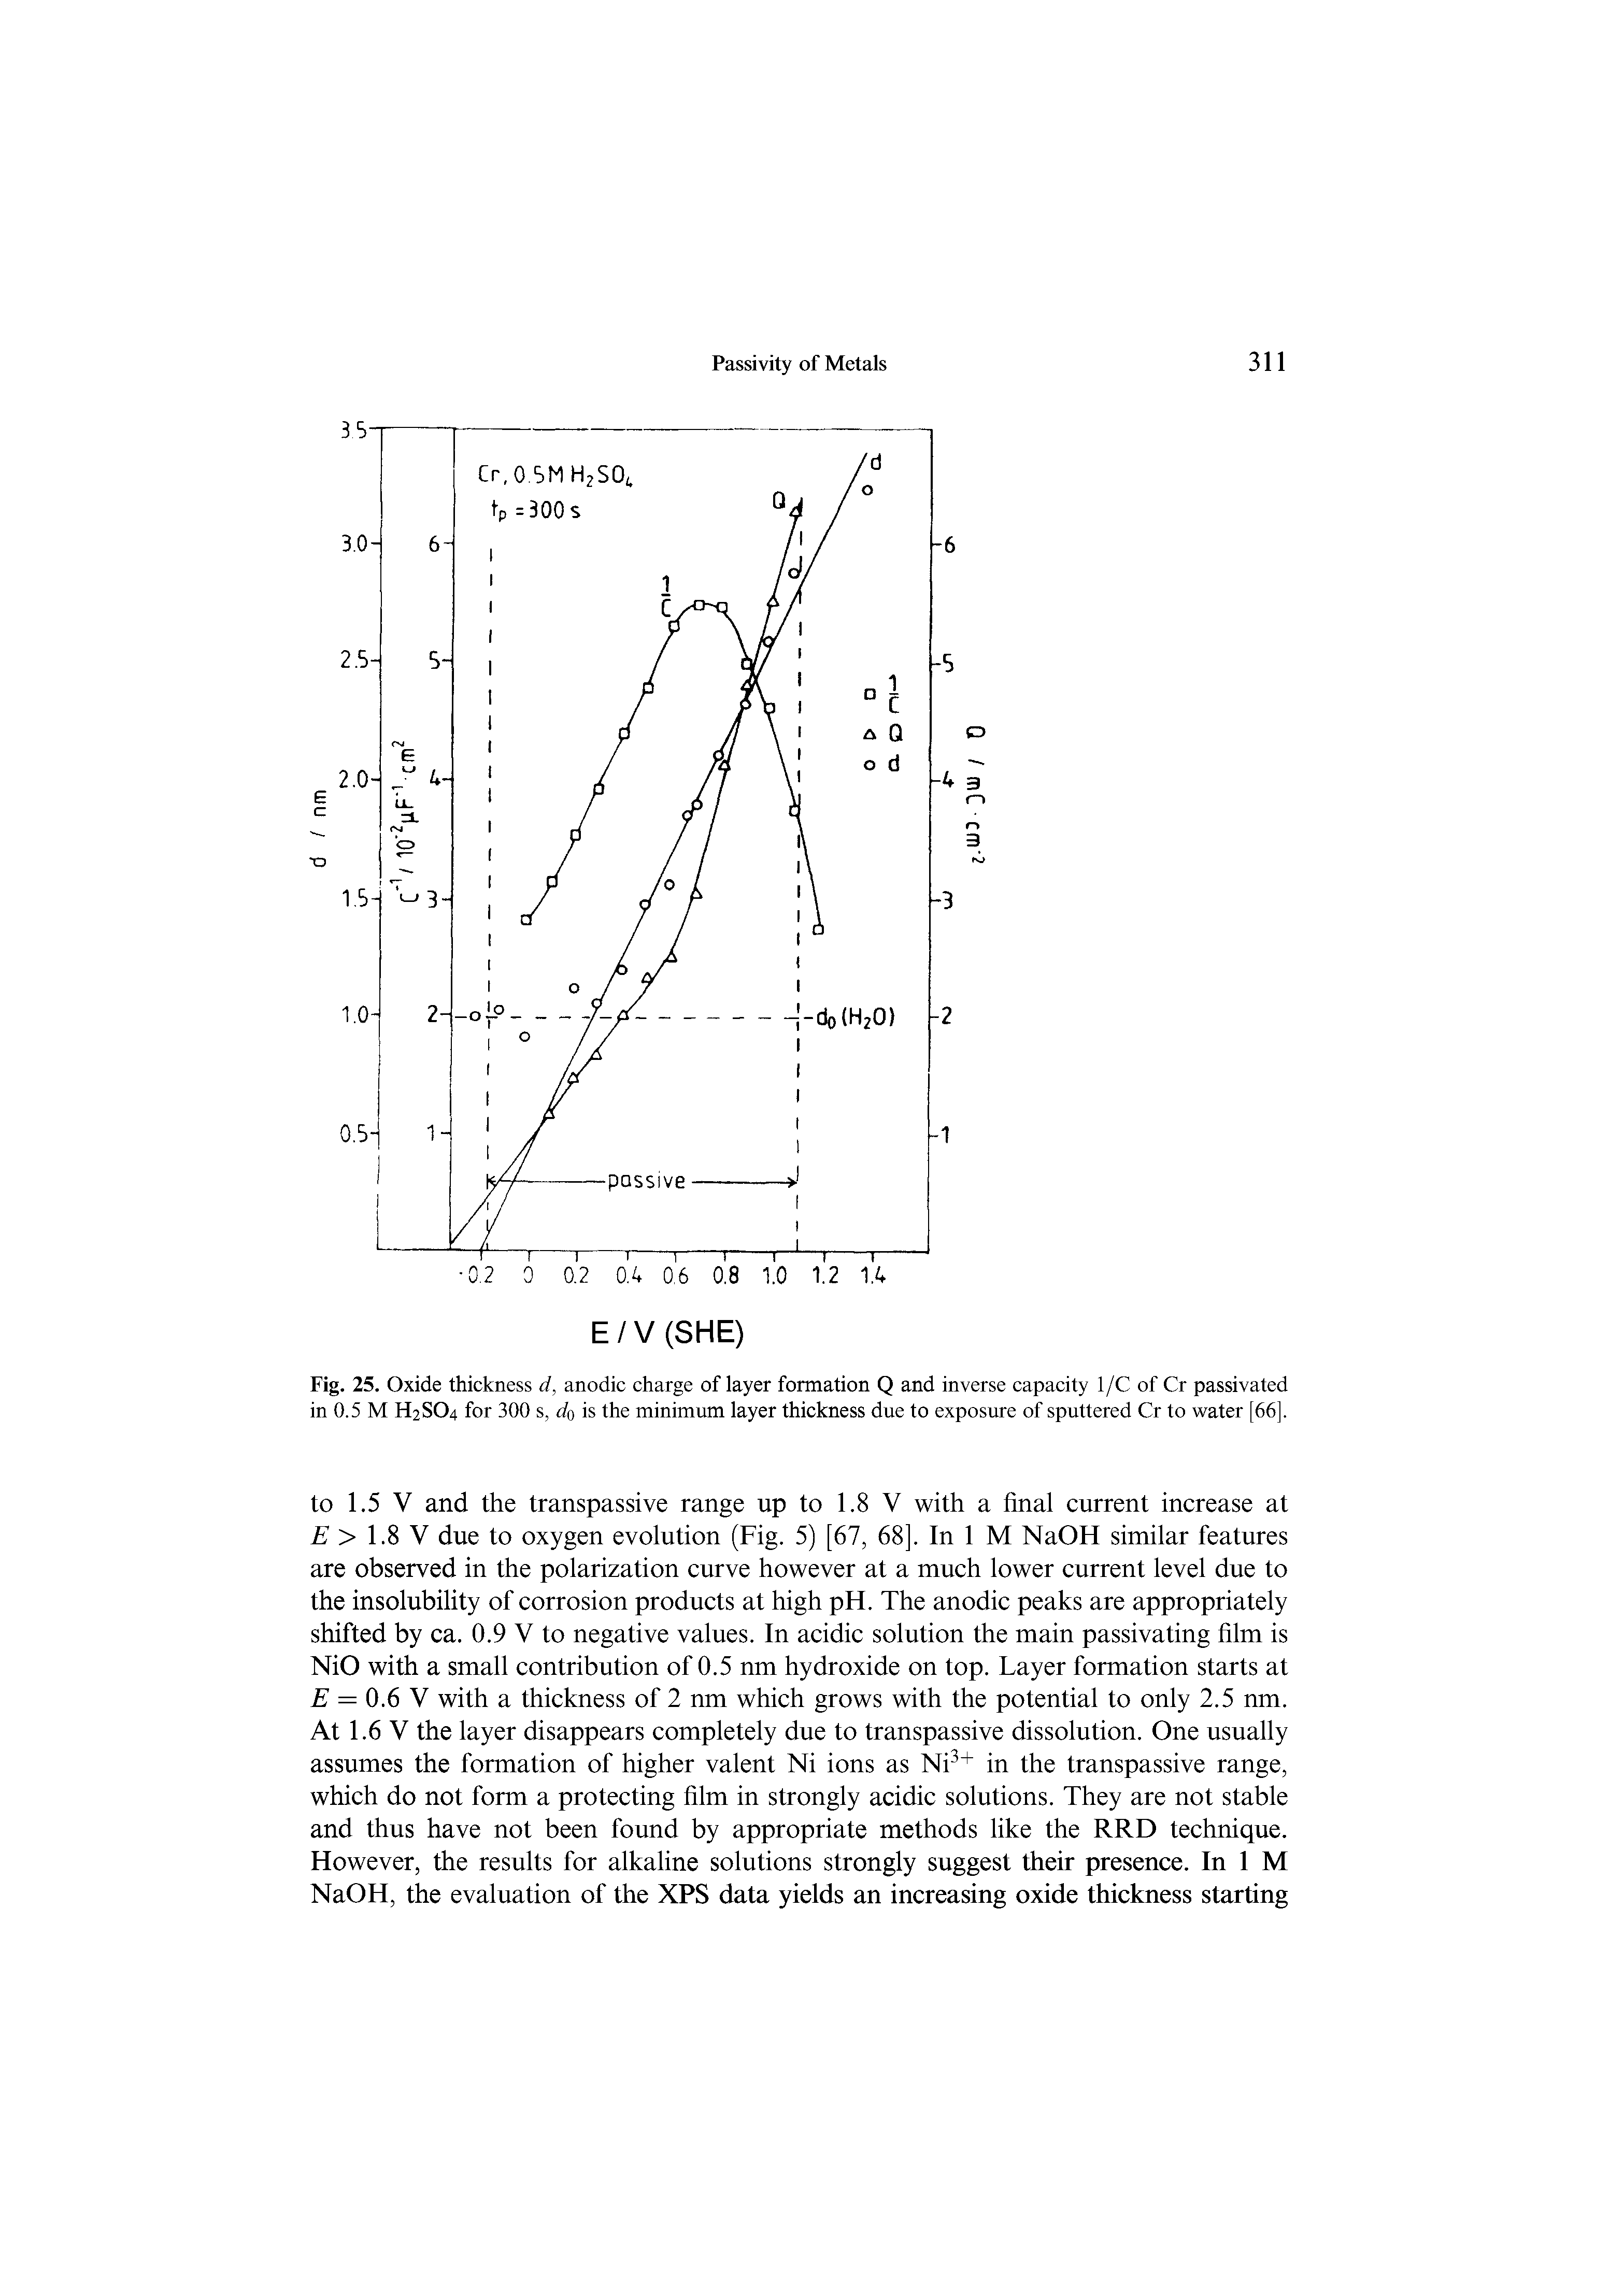 Fig. 25. Oxide thickness d, anodic charge of layer formation Q and inverse capacity 1/C of Cr passivated in 0.5 M H2SO4 for 300 s, do is the minimum layer thickness due to exposure of sputtered Cr to water [66],...